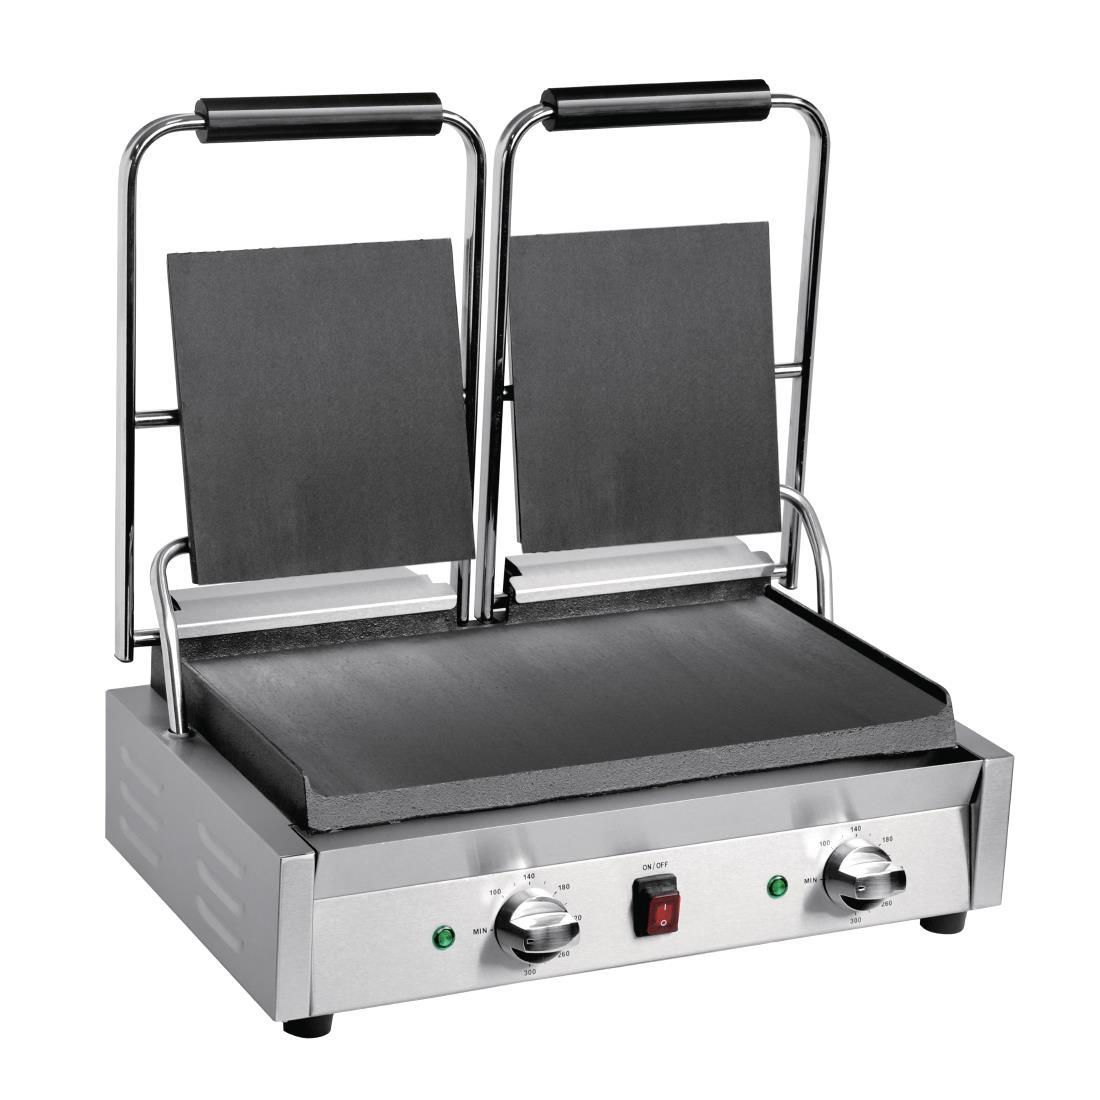 Buffalo Bistro Double Contact Grill - DY998  - 5